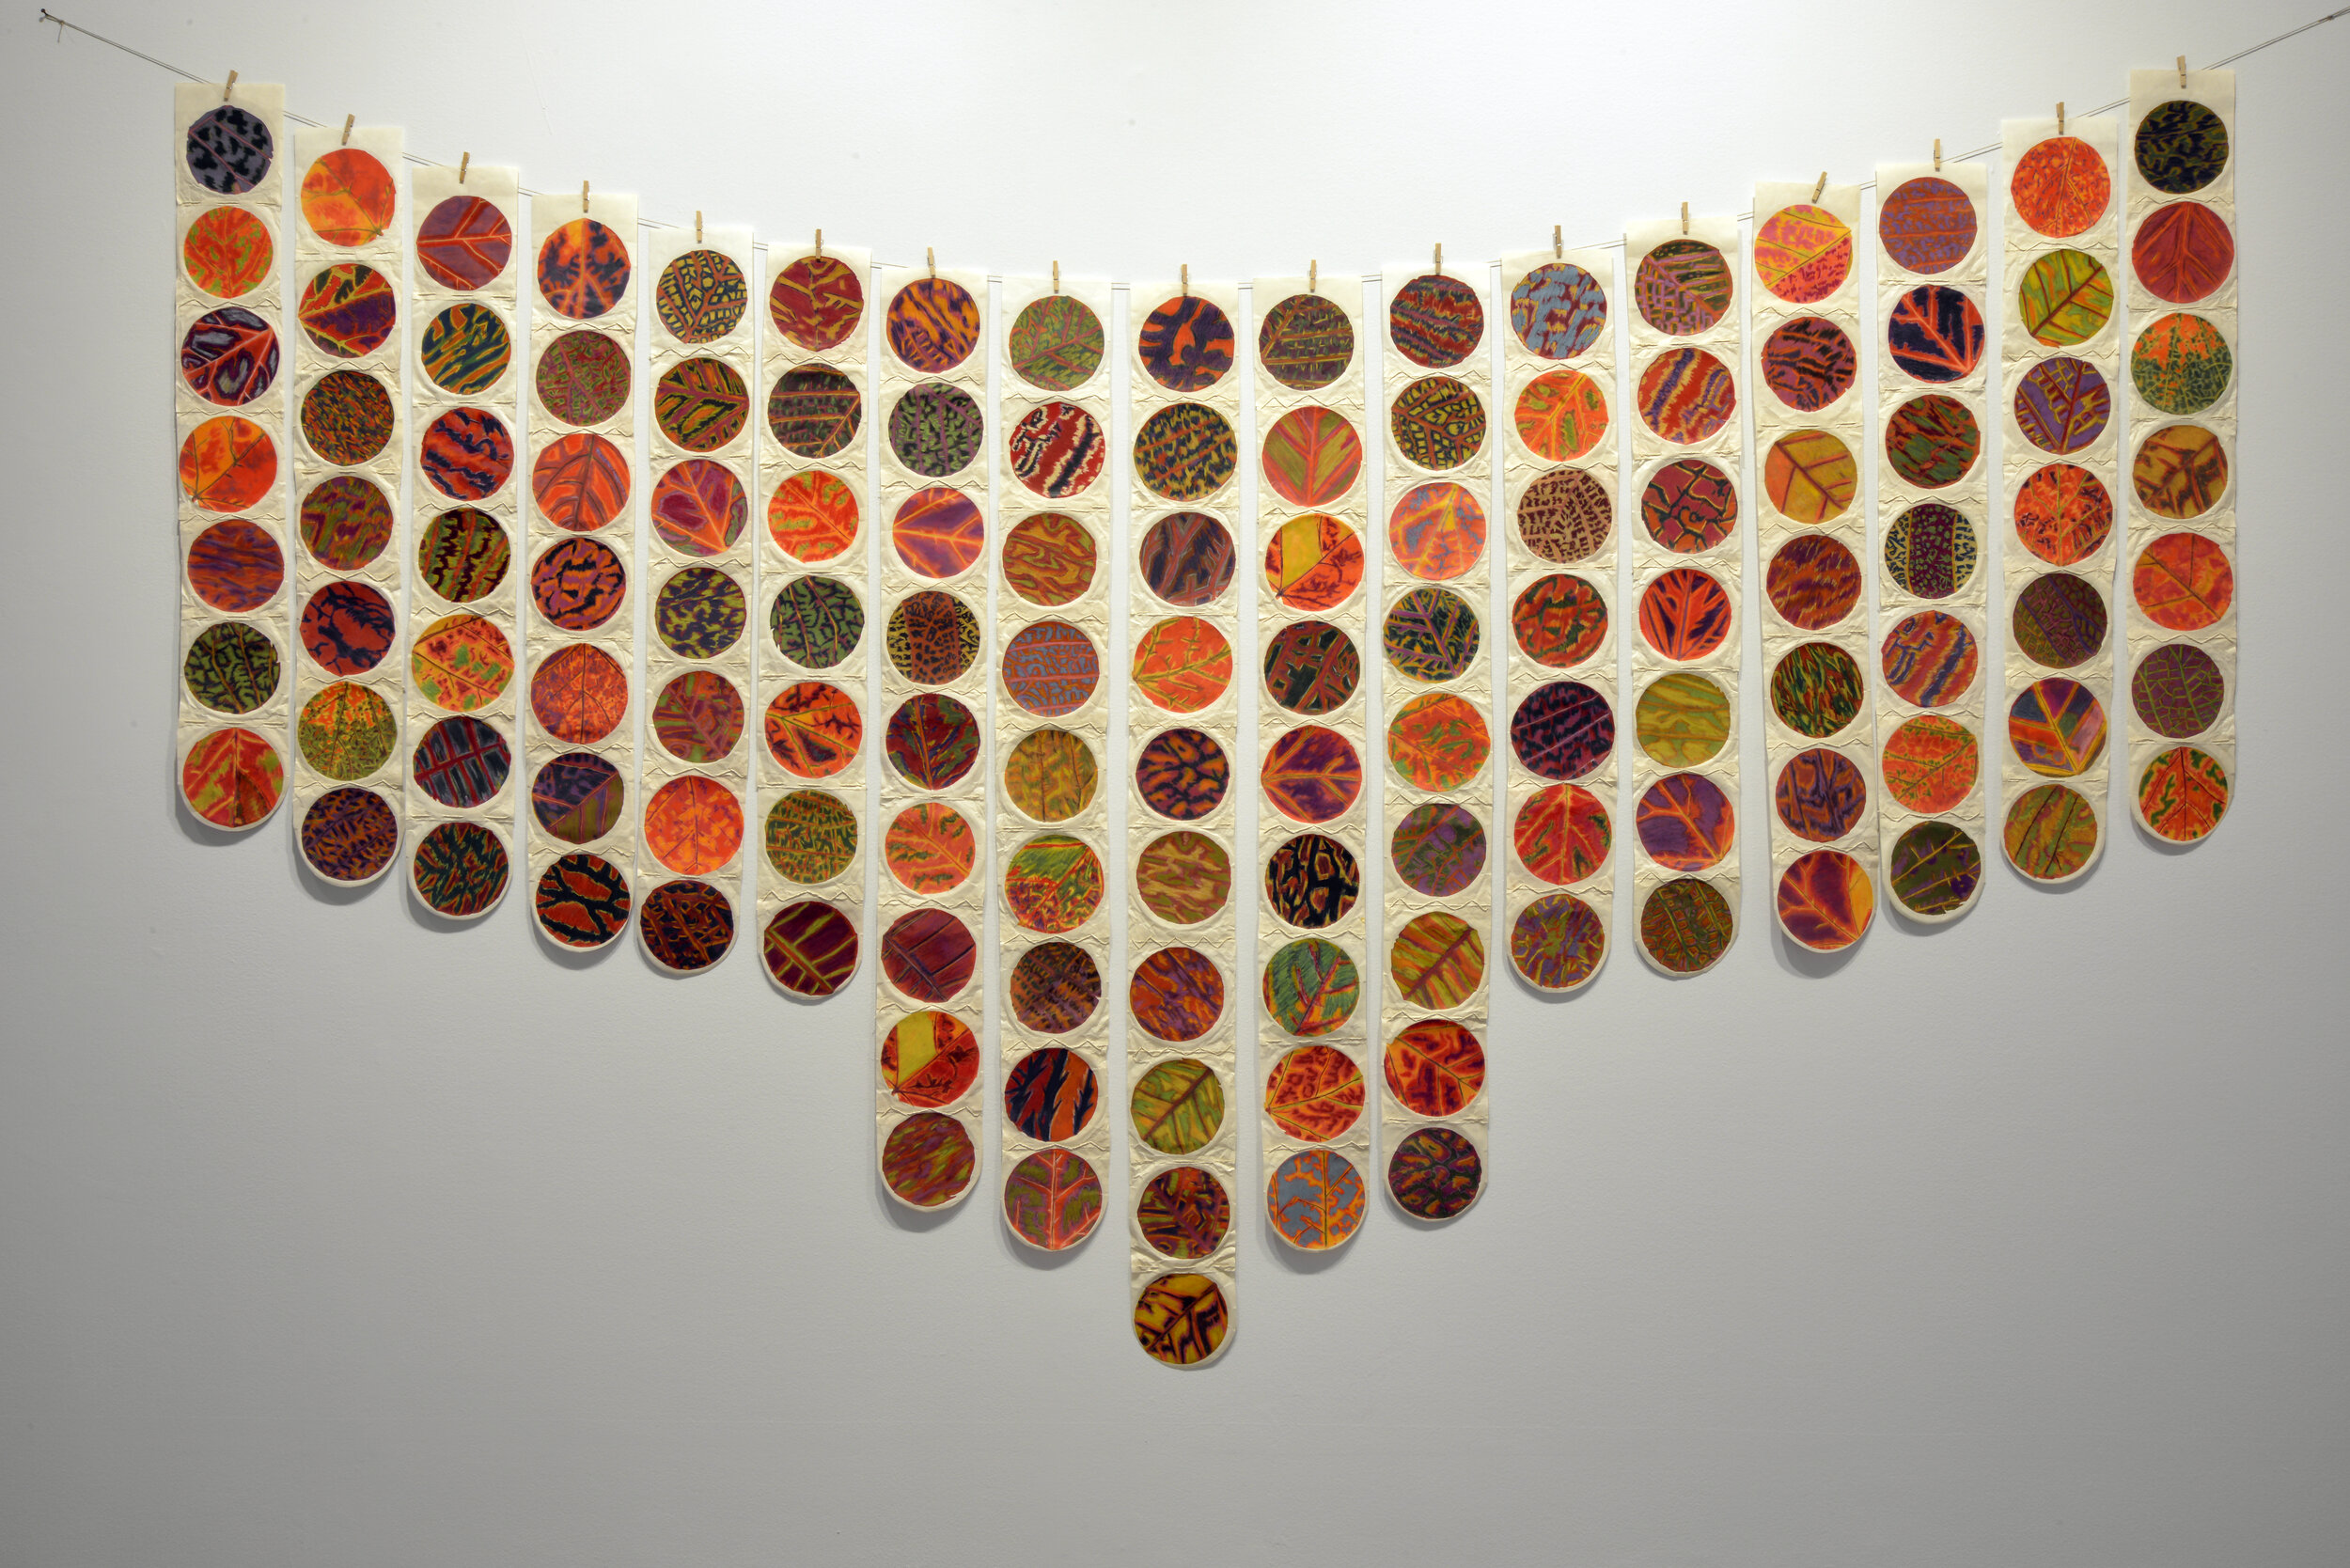  Daphne Boyer,  D’ohor Akouchikaew, Hung Out to Dry, Sur la corde à linge , 2019, photographed leaves printed on Japanese paper, hand tinted with pigmented pencils, handspun paper thread, clothes pins, linen thread.   